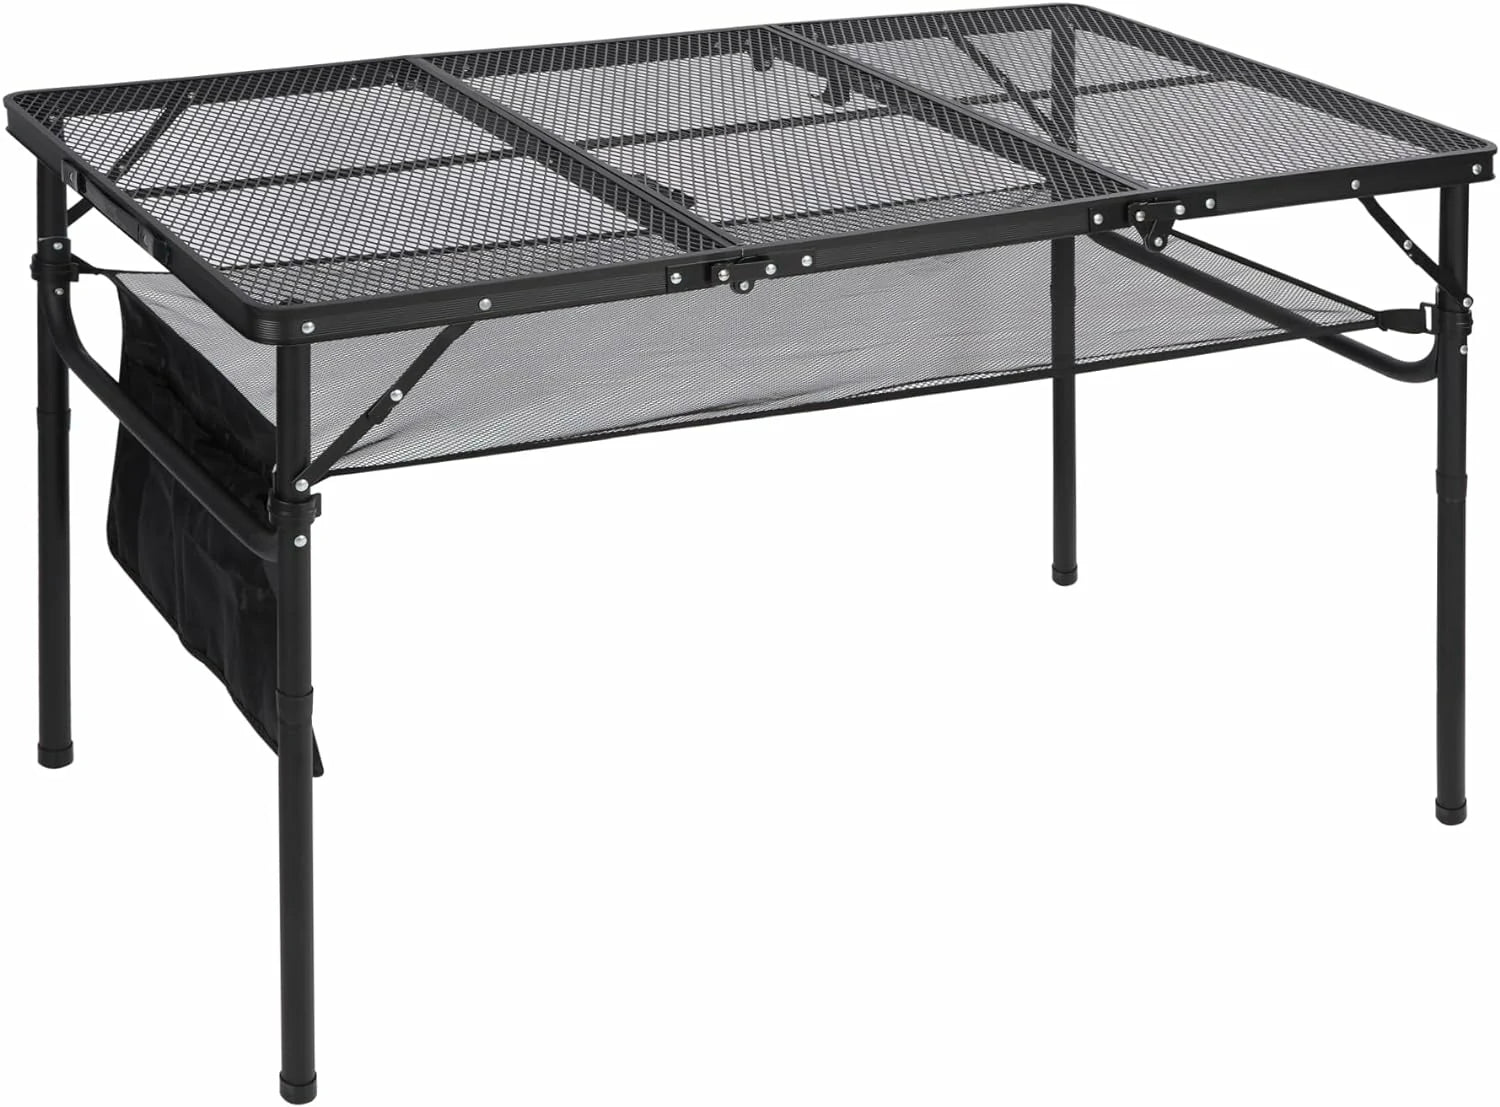 REDCAMP Folding Grill Table